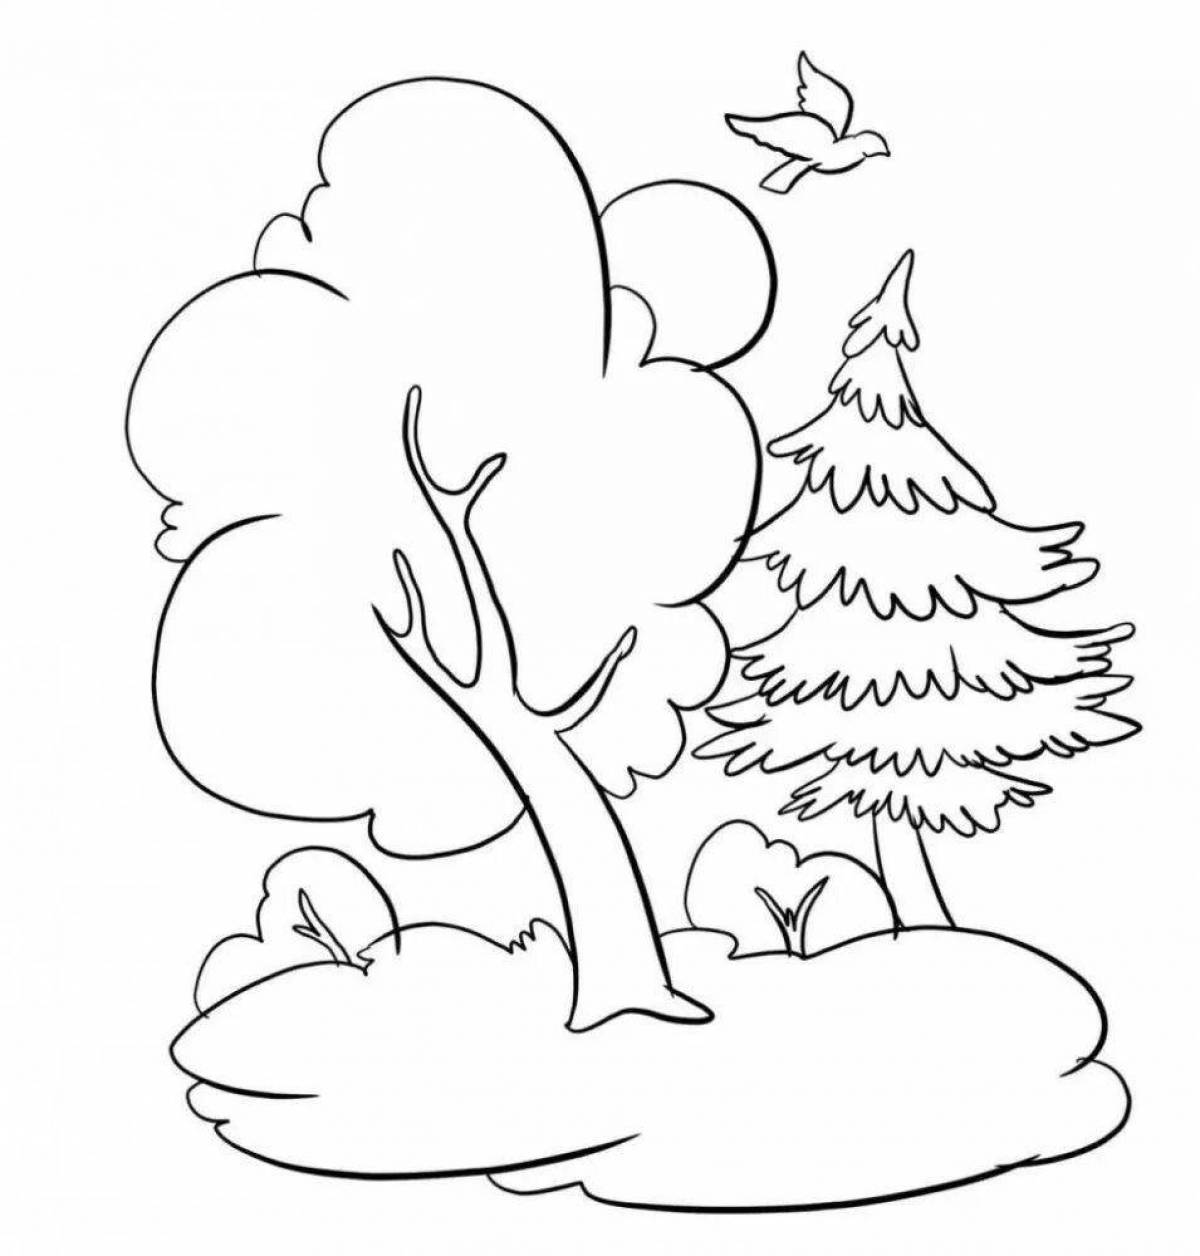 Coloring page idyllic spruce forest